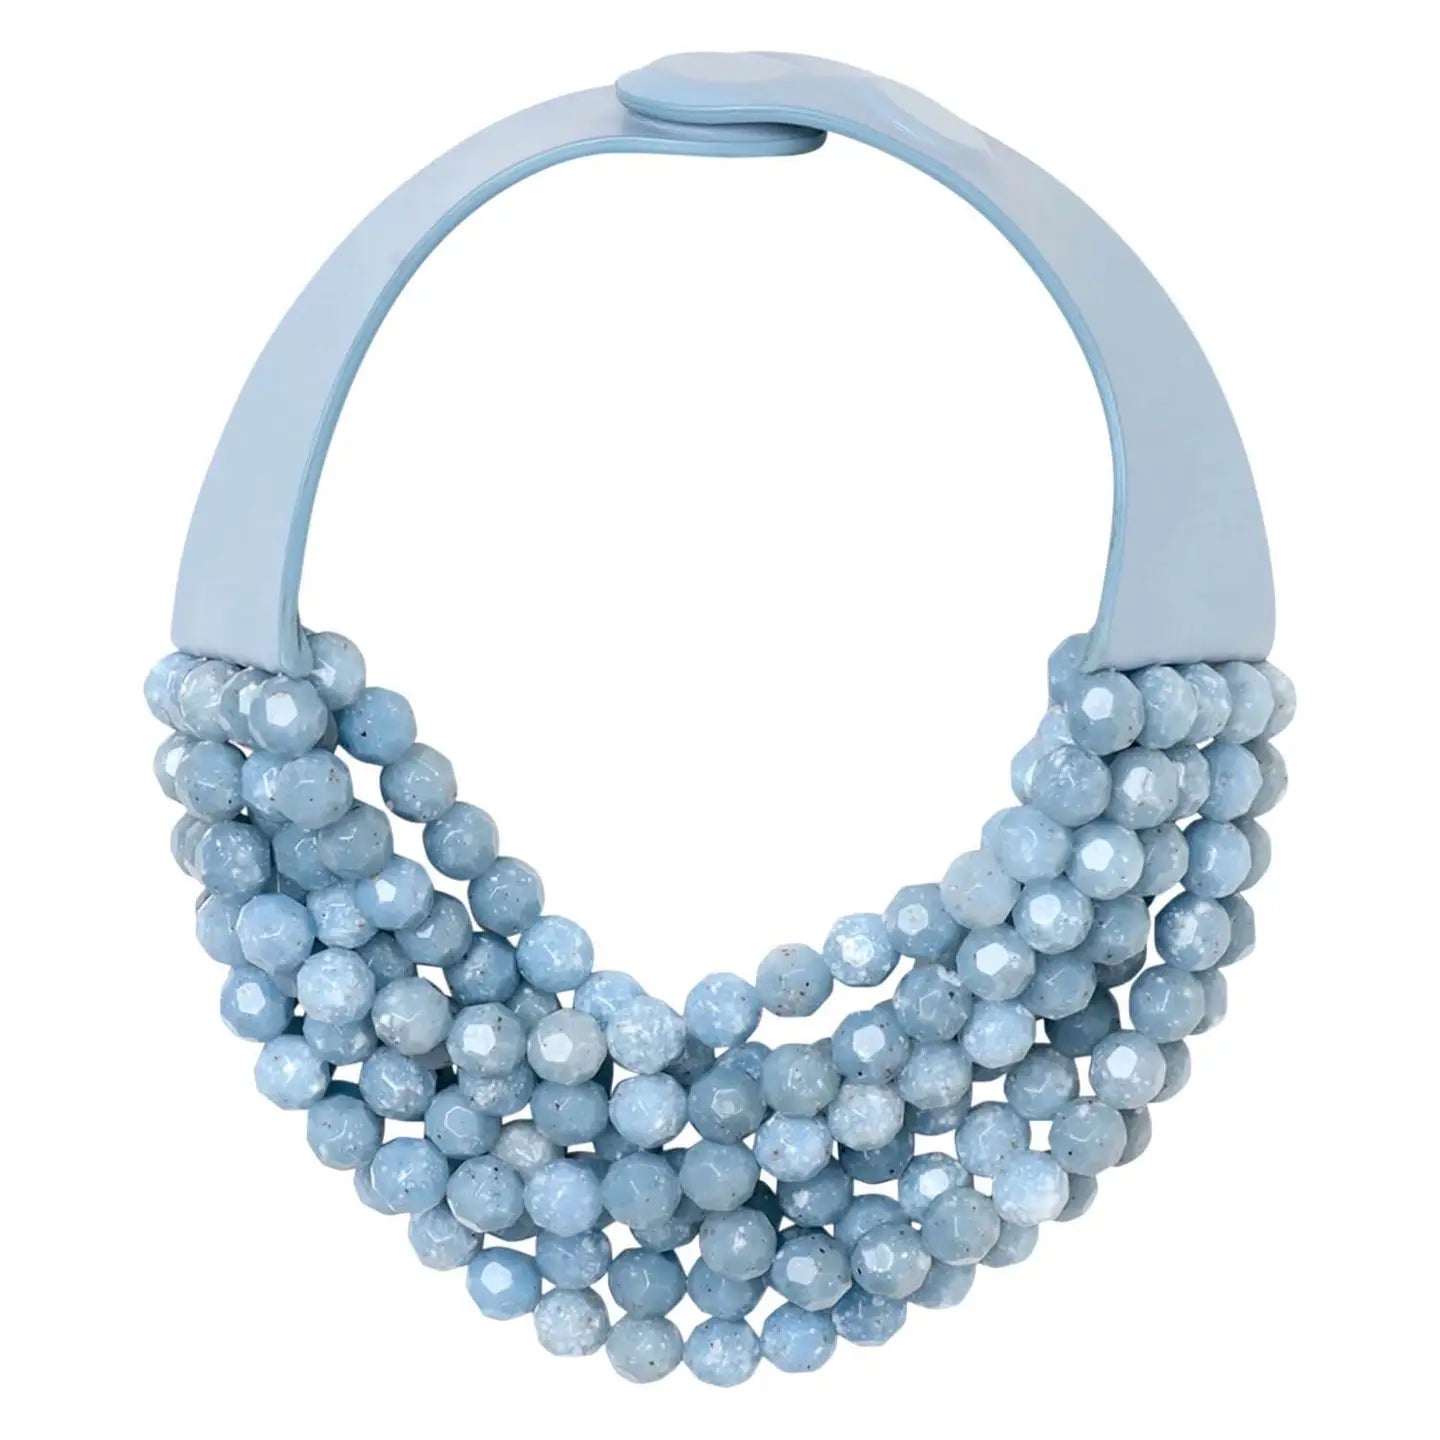 Fairchild Baldwin Statement Necklace - Spring  Collection